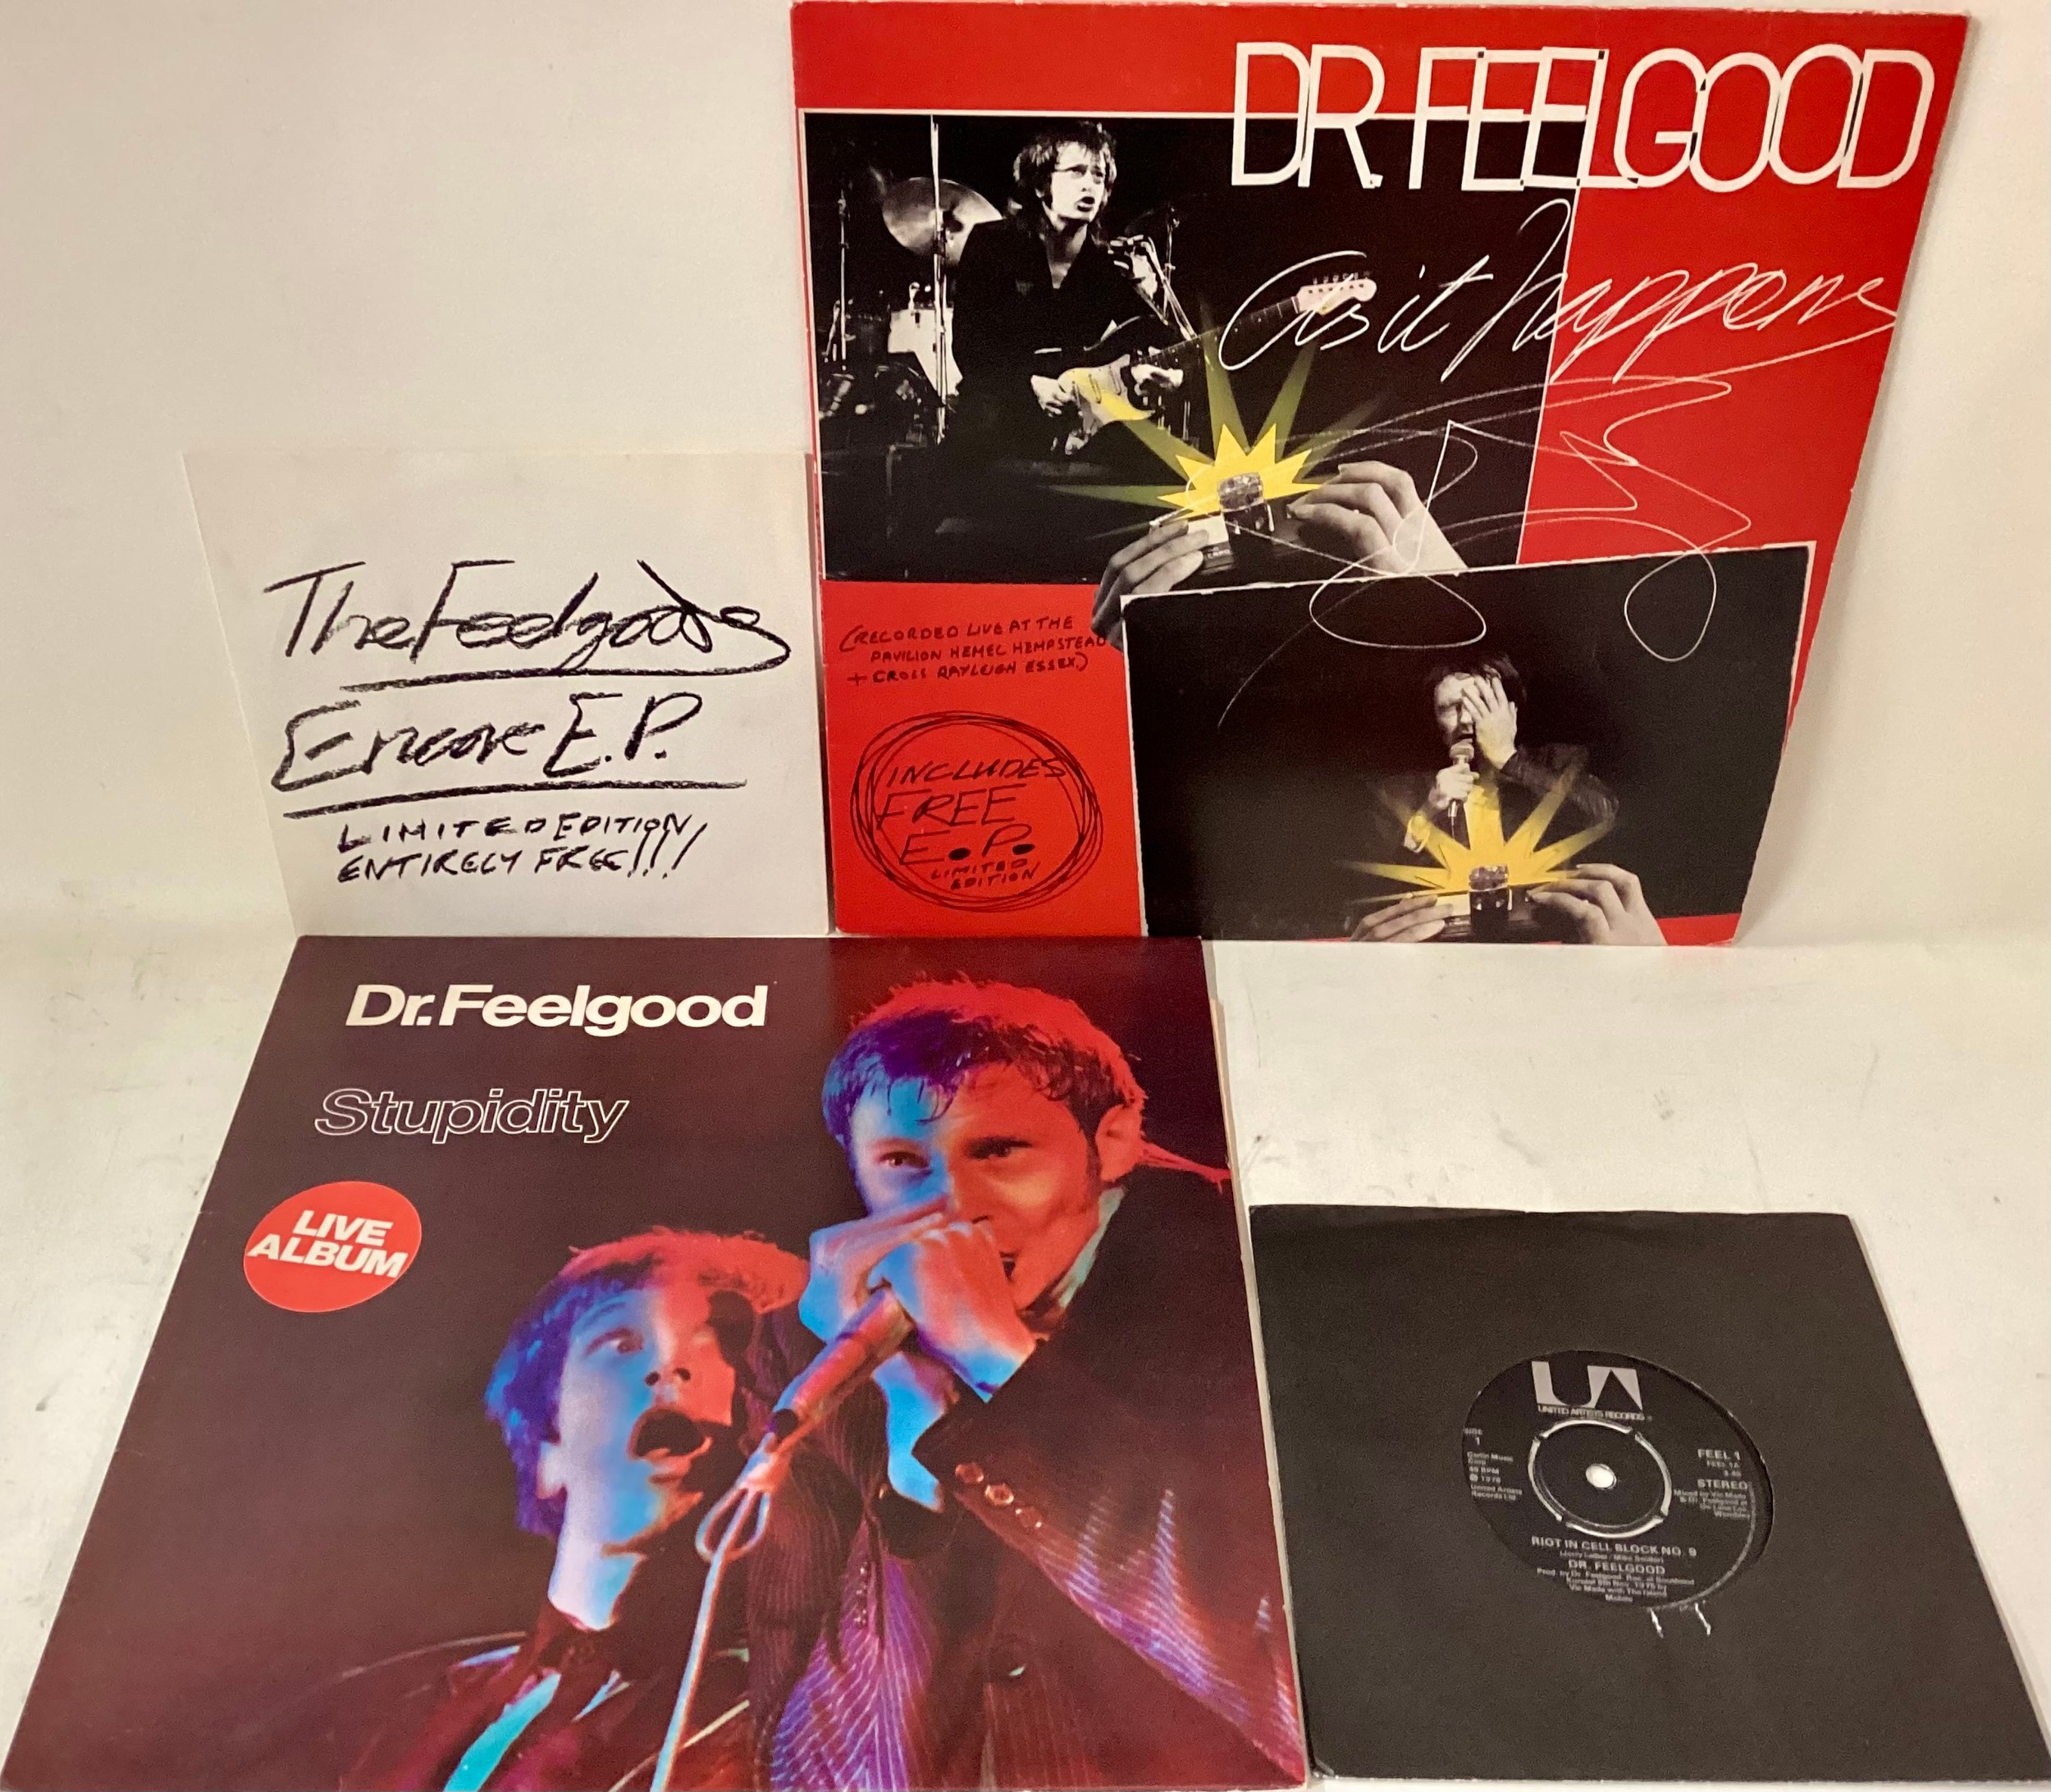 DR FEELGOOD VINYL LP RECORDS X 2. These albums are entitled - Stupidity (UAS 29990) and - As It